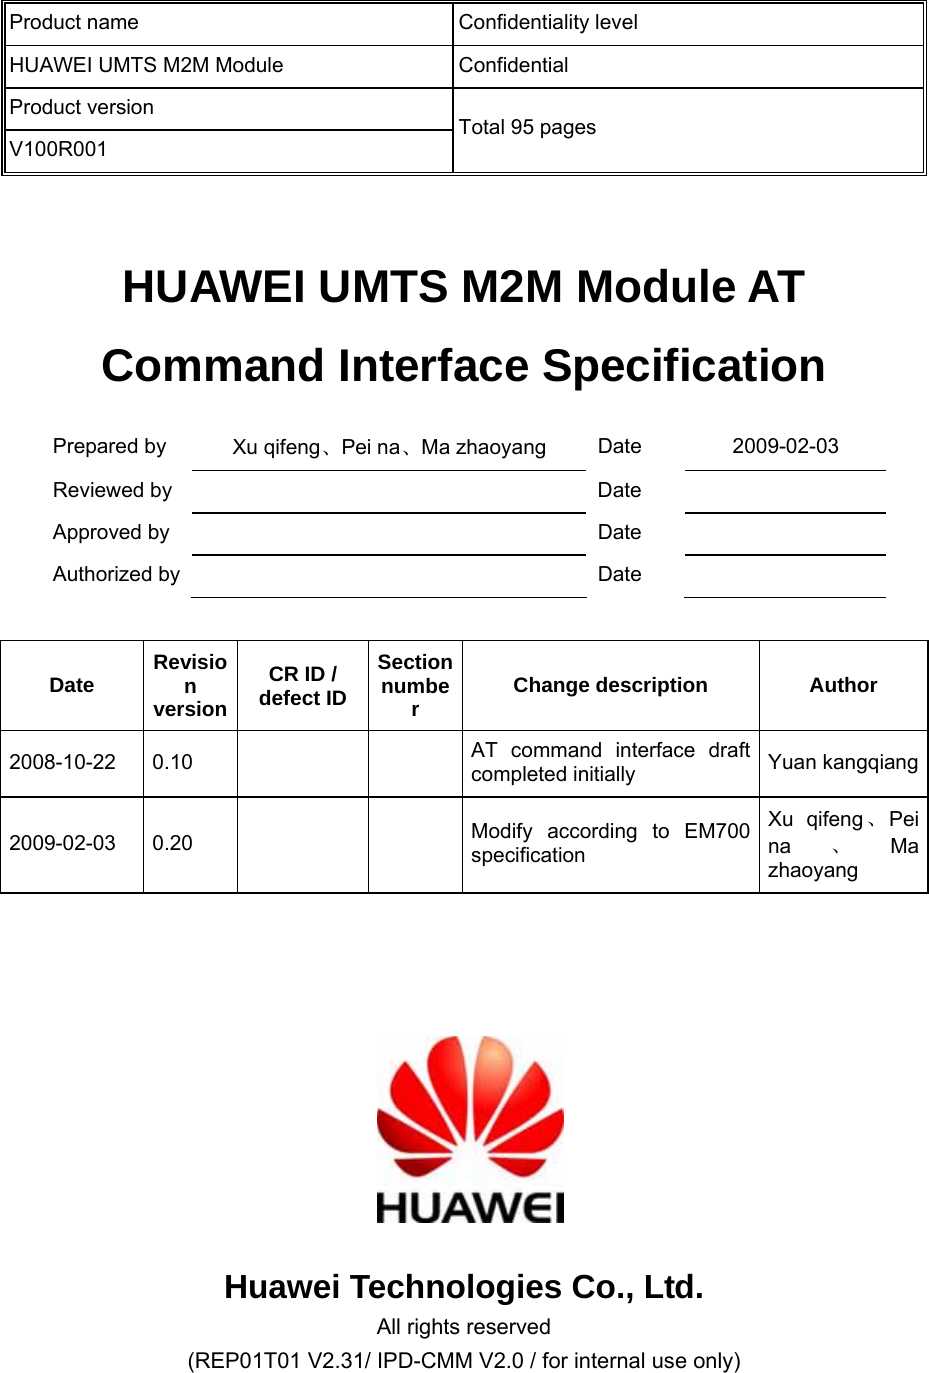   HUAWEI UMTS M2M Module AT Command Interface Specification Prepared by    Xu qifeng、Pei na、Ma zhaoyang  Date 2009-02-03 Reviewed by      Date   Approved by    Date   Authorized by    Date    Date  Revision versionCR ID / defect ID Section number  Change description  Author 2008-10-22 0.10      AT command interface draft completed initially    Yuan kangqiang2009-02-03 0.20      Modify according to EM700 specification Xu qifeng、Pei na 、Ma zhaoyang       Huawei Technologies Co., Ltd. All rights reserved (REP01T01 V2.31/ IPD-CMM V2.0 / for internal use only) Product name  Confidentiality level HUAWEI UMTS M2M Module  Confidential Product version V100R001 Total 95 pages   